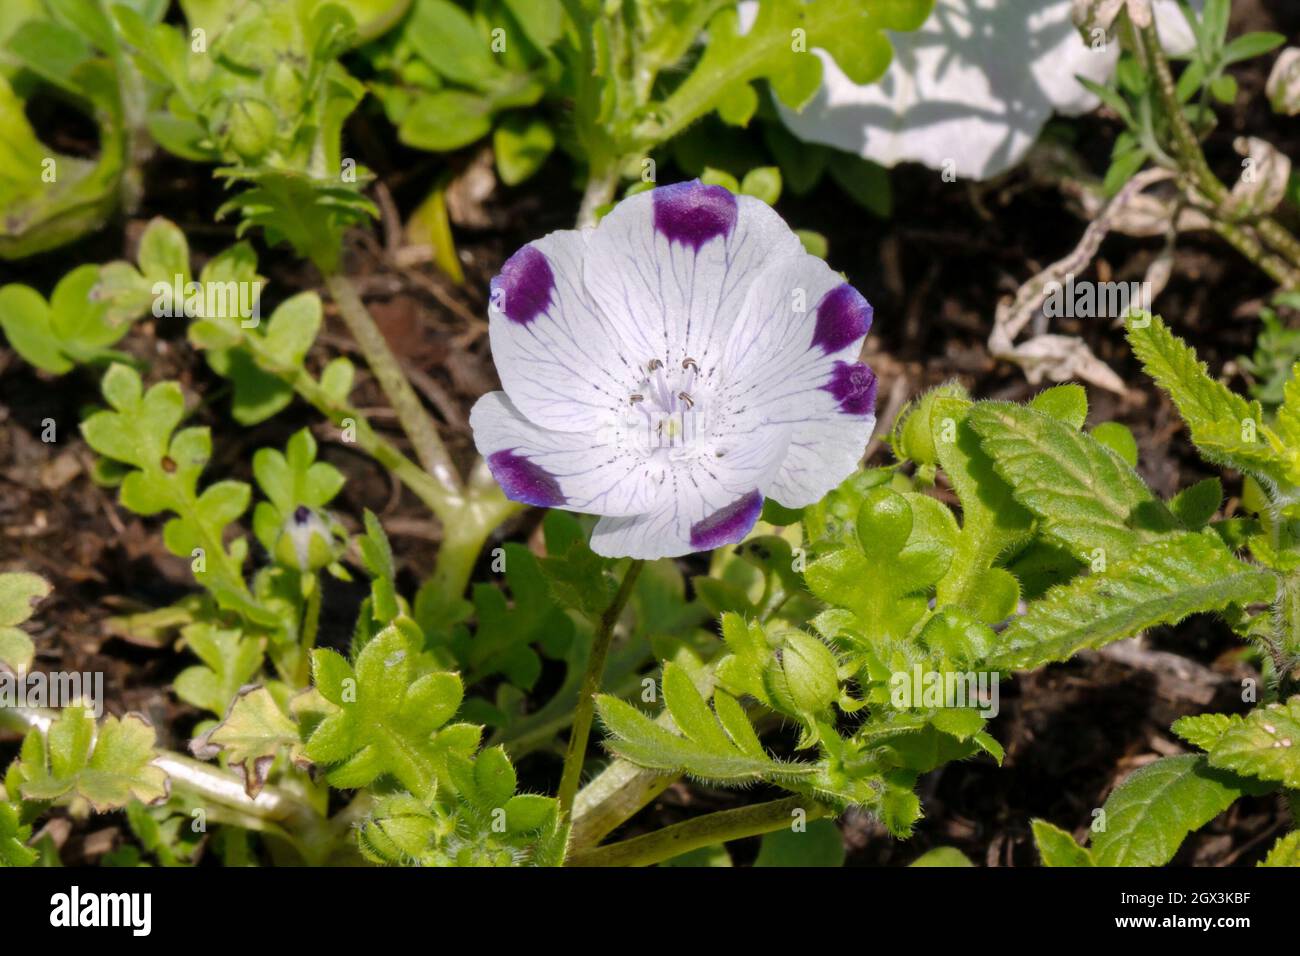 A groundcover, unpretentious flower of Nemophila maculata, white with purple dots, close-up on a sunny summer day. Stock Photo